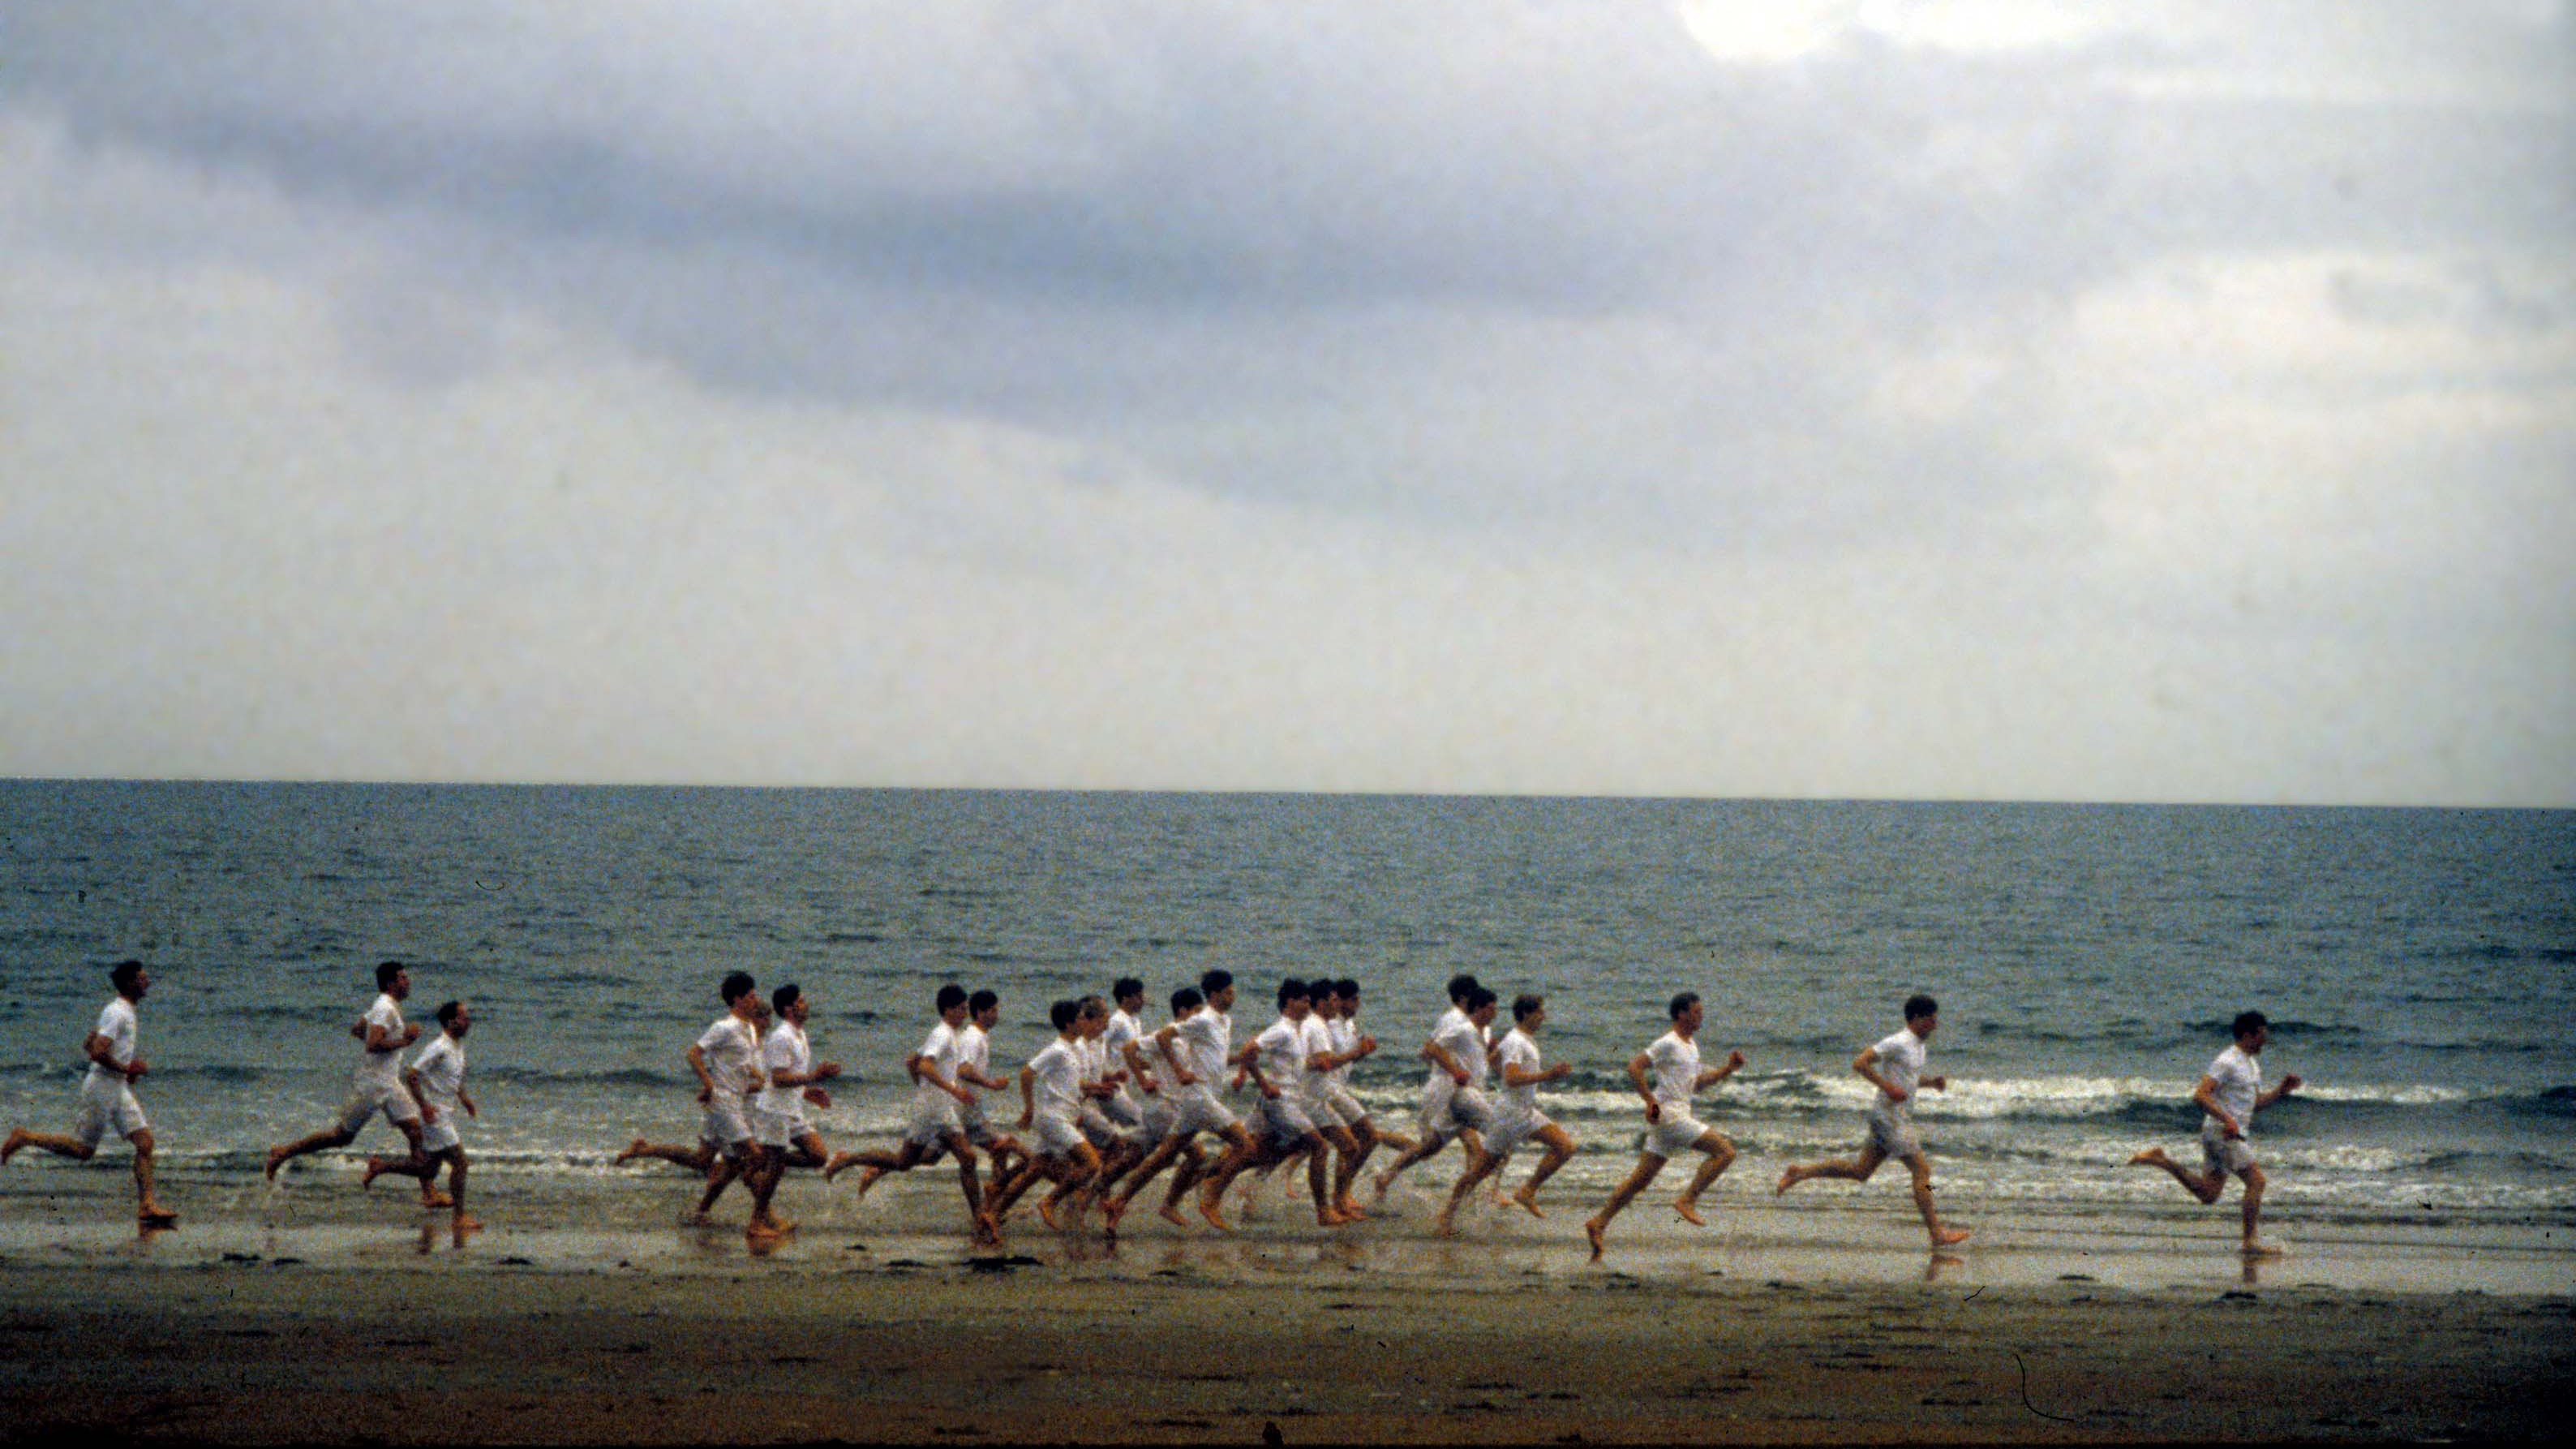 People running on the beach in Chariots of Fire